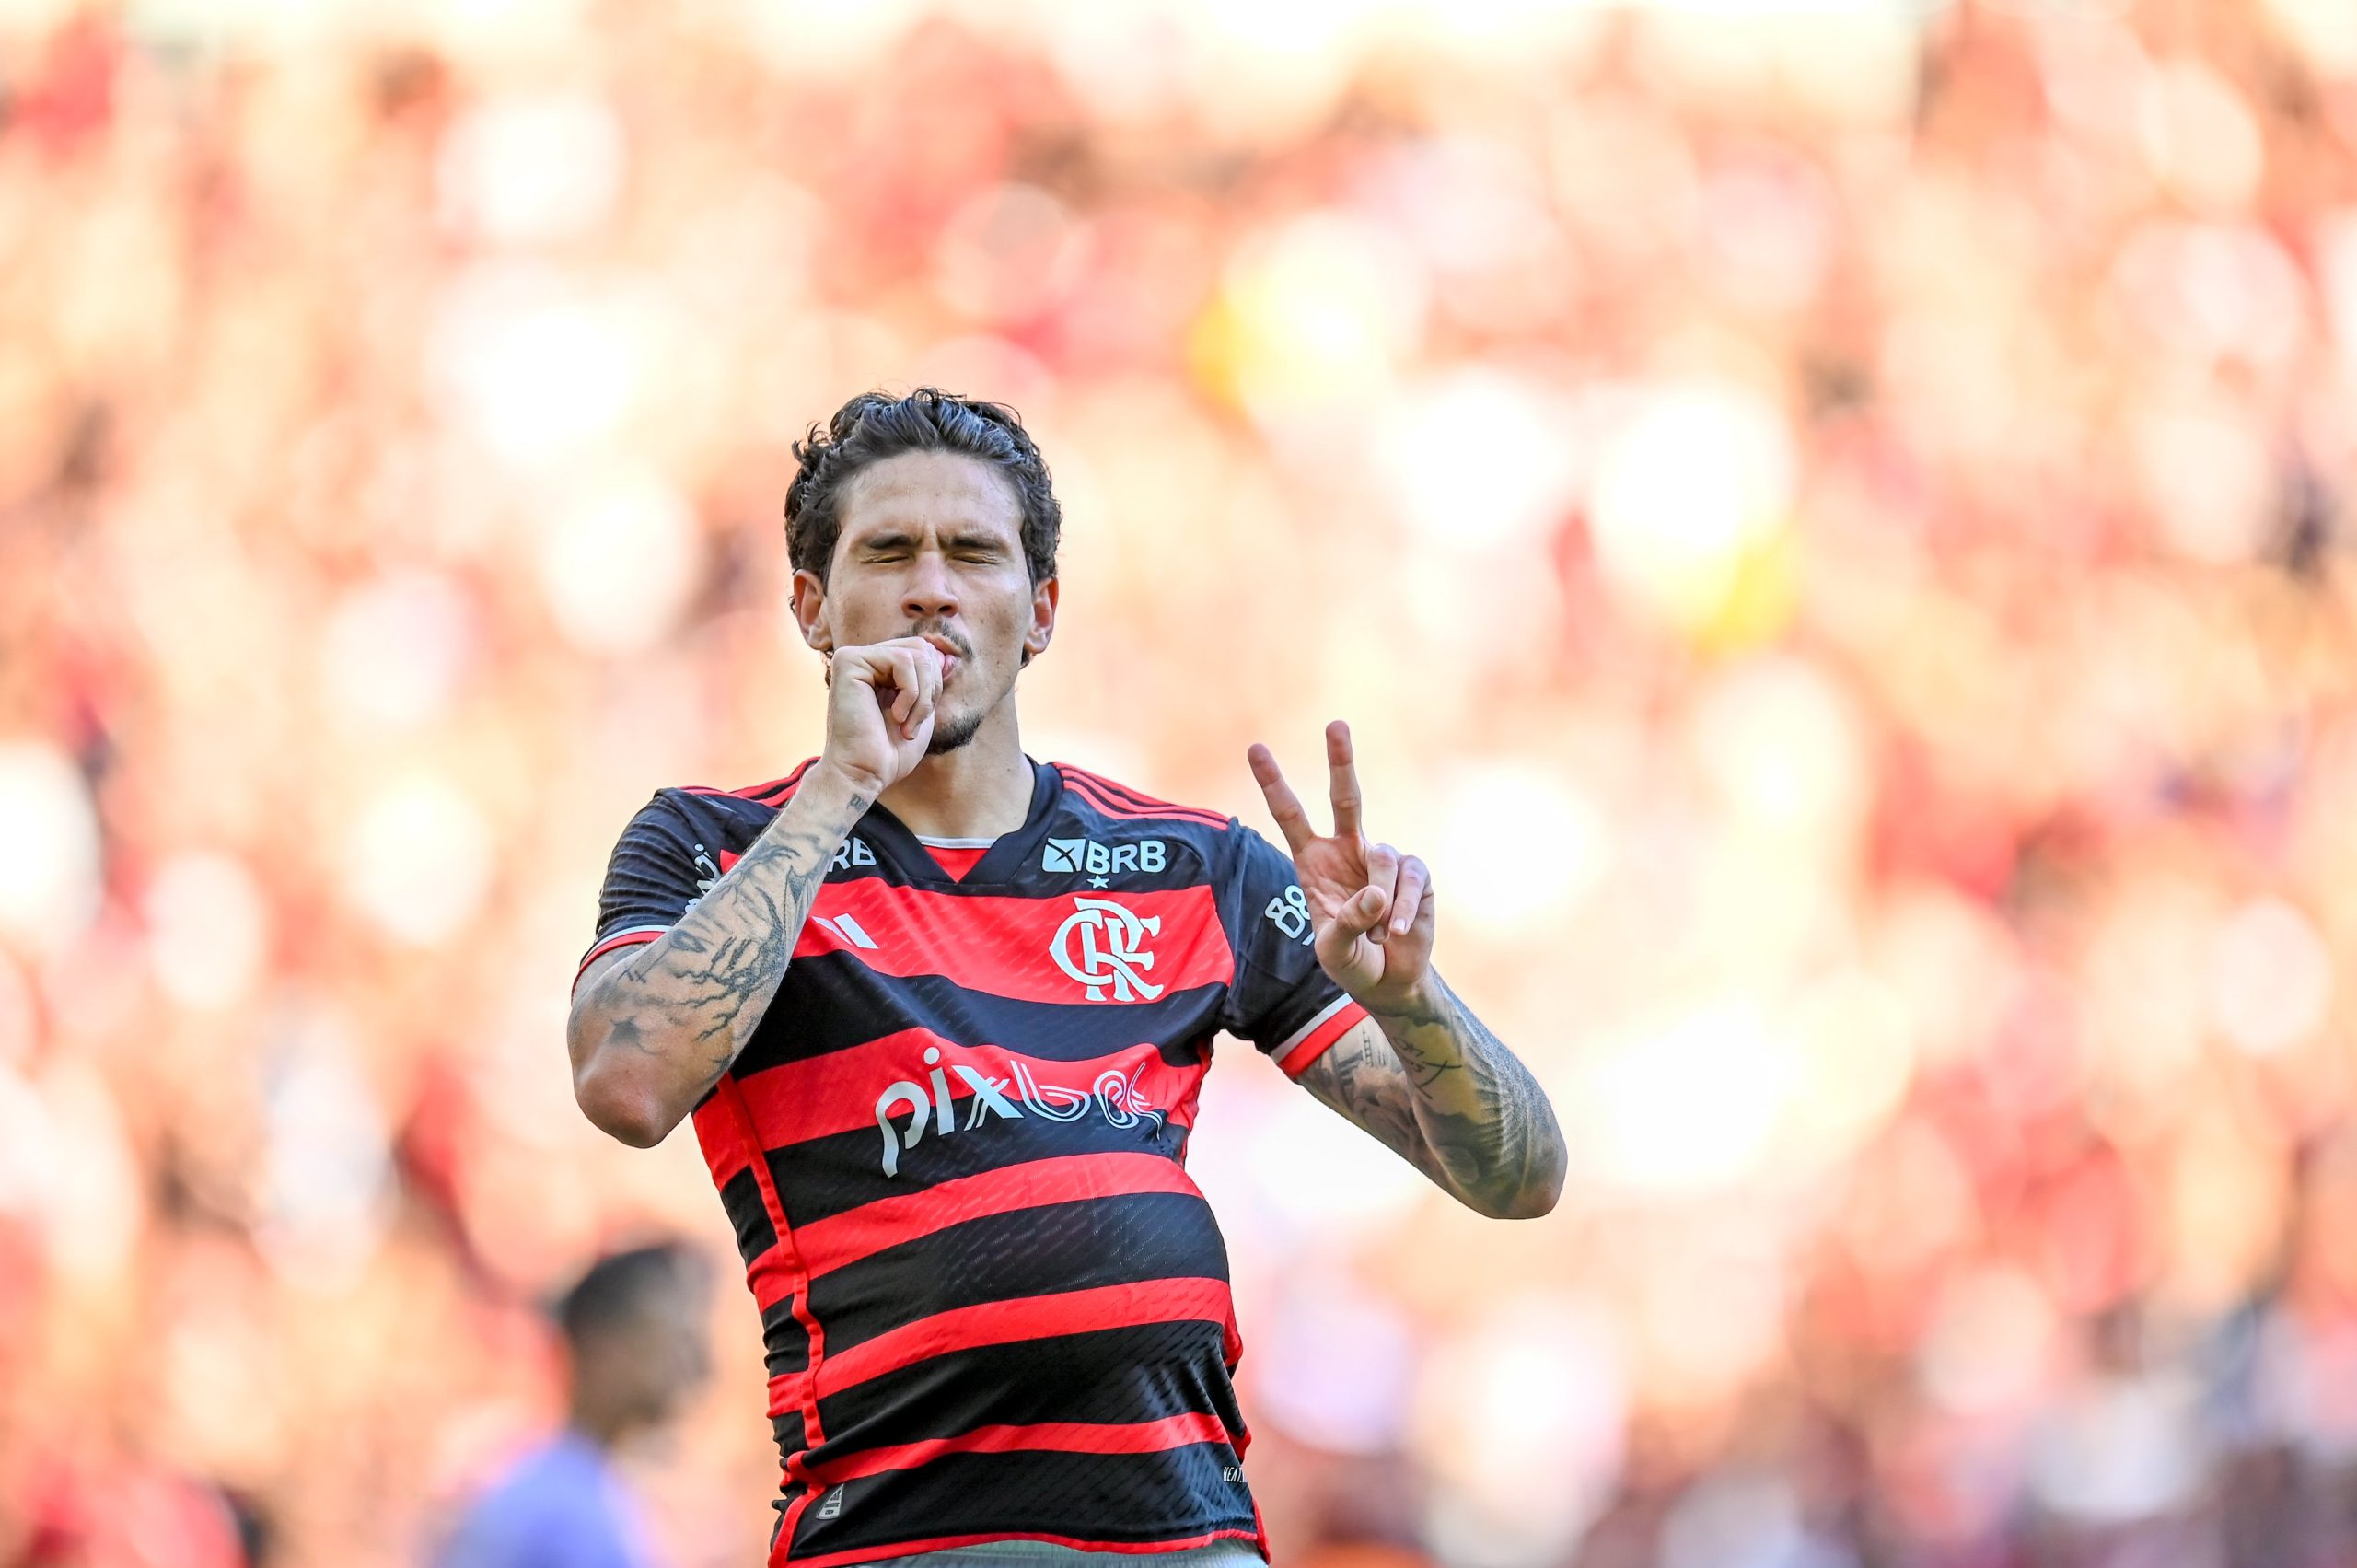 Flamengo defeats Fluminense and approaches the Guanabara Cup title in the Carioca Championship